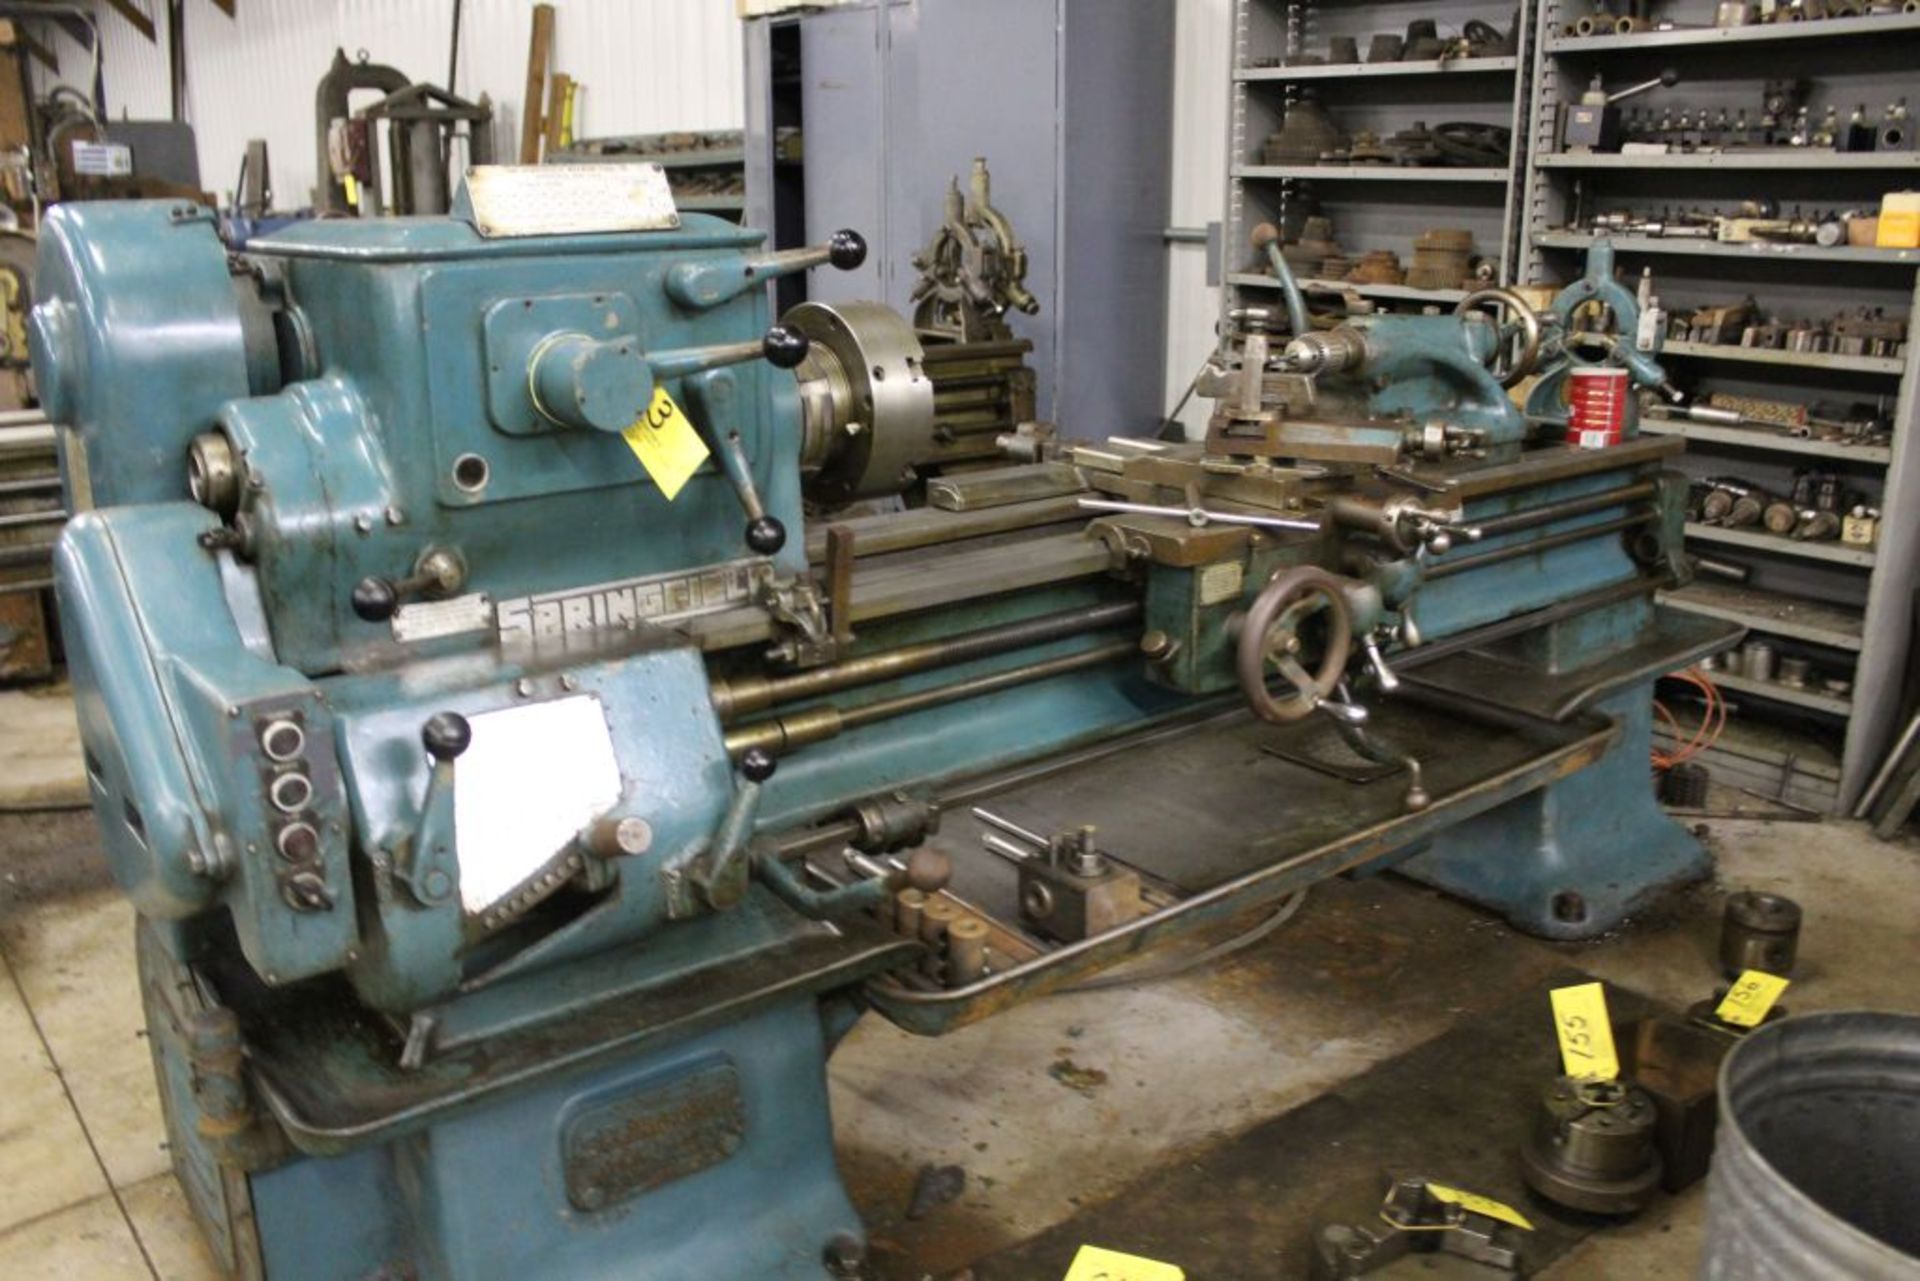 Springfield lathe, sn 52071, 14", 1 3/4" hole, 16" swing, 48" center to center, taper attachment, - Image 13 of 14